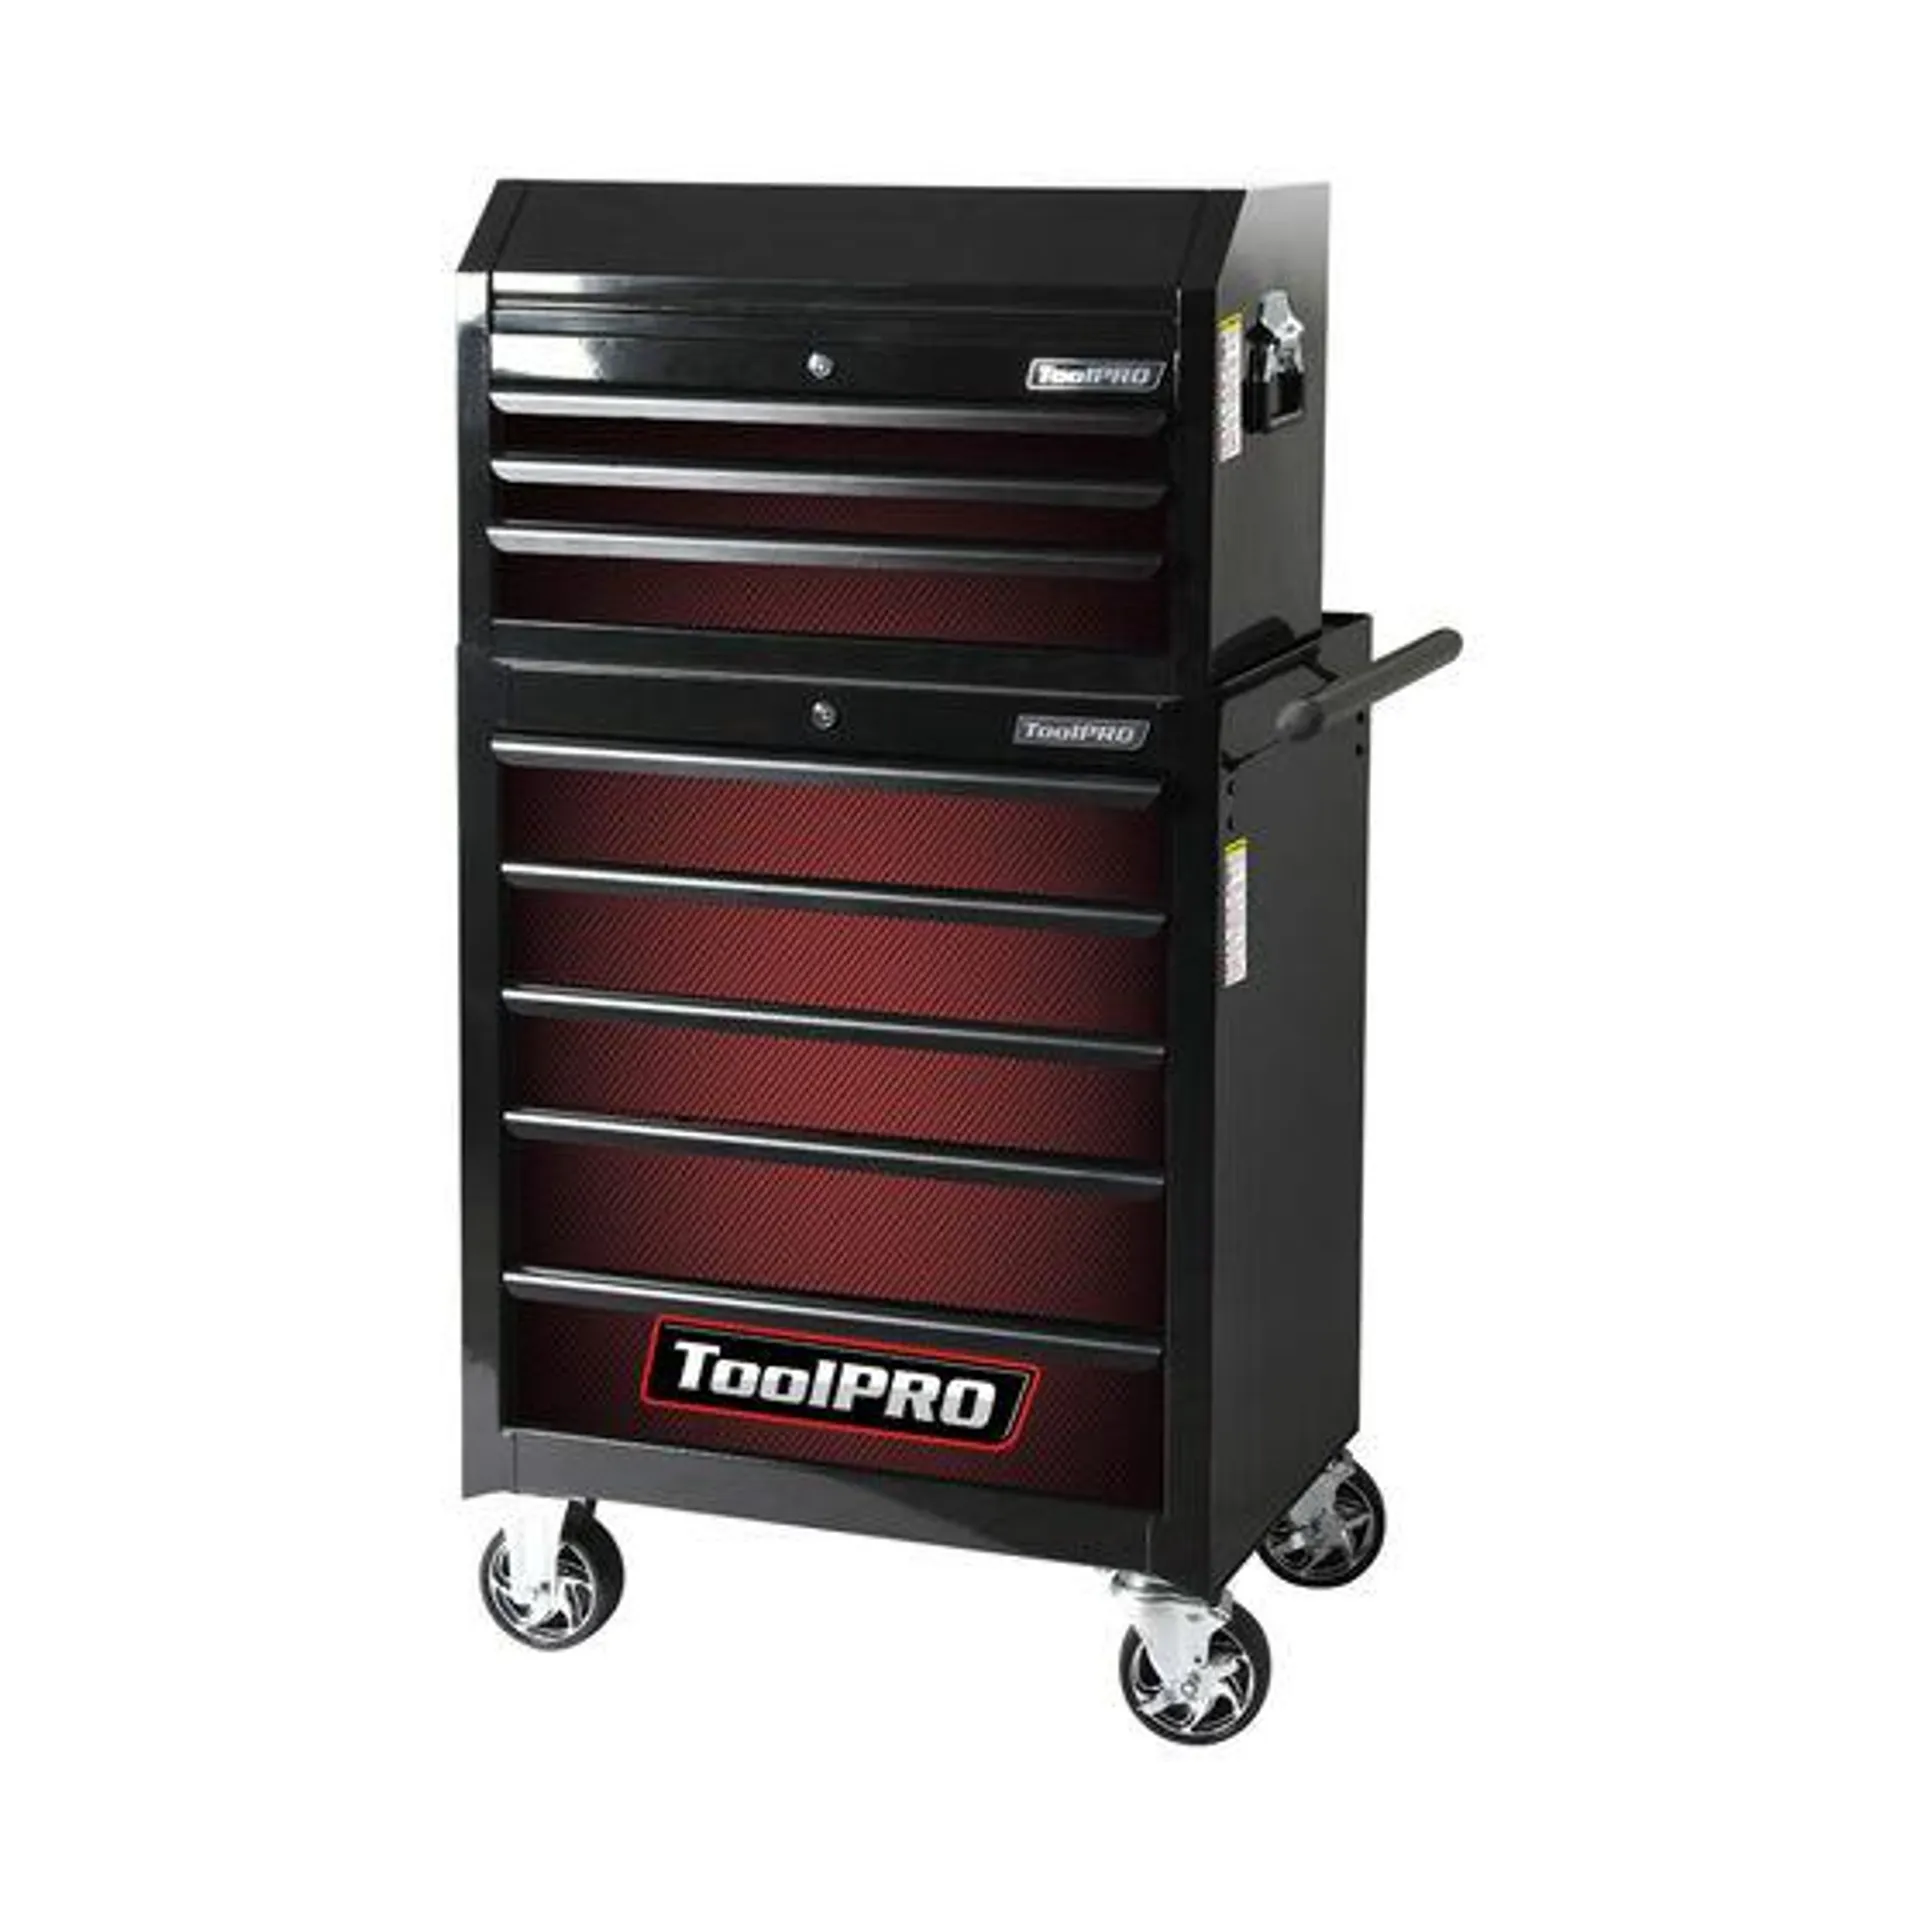 ToolPRO Tool Cabinet Magnetic Fascia Set - Red Carbon Fibre, Suits 26" Chest & 27" Cabinet